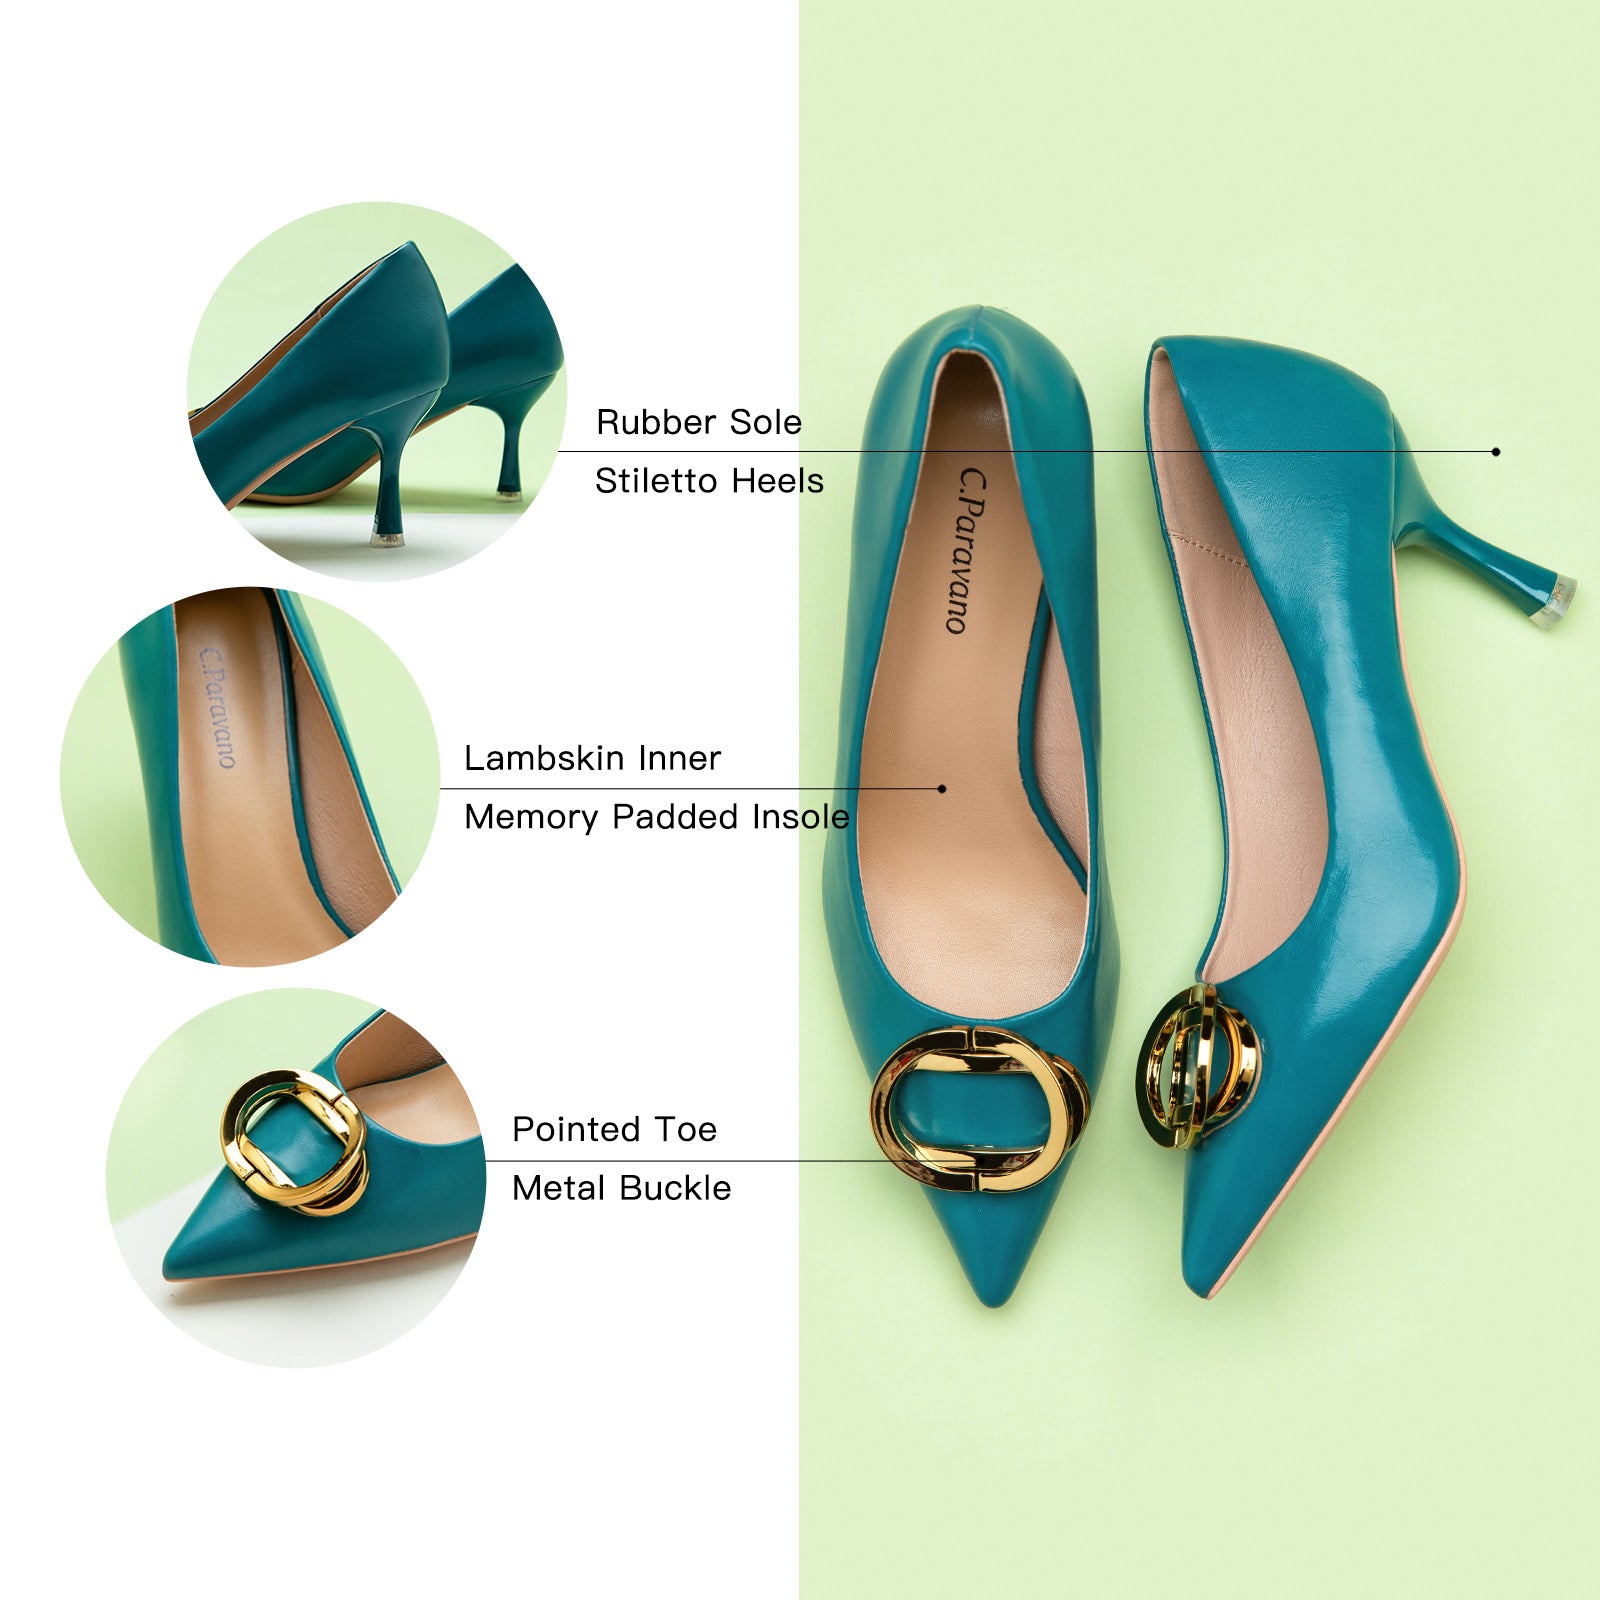 Peacock Blue Metal Buckled Pumps, a unique and eye-catching addition to your footwear collection.